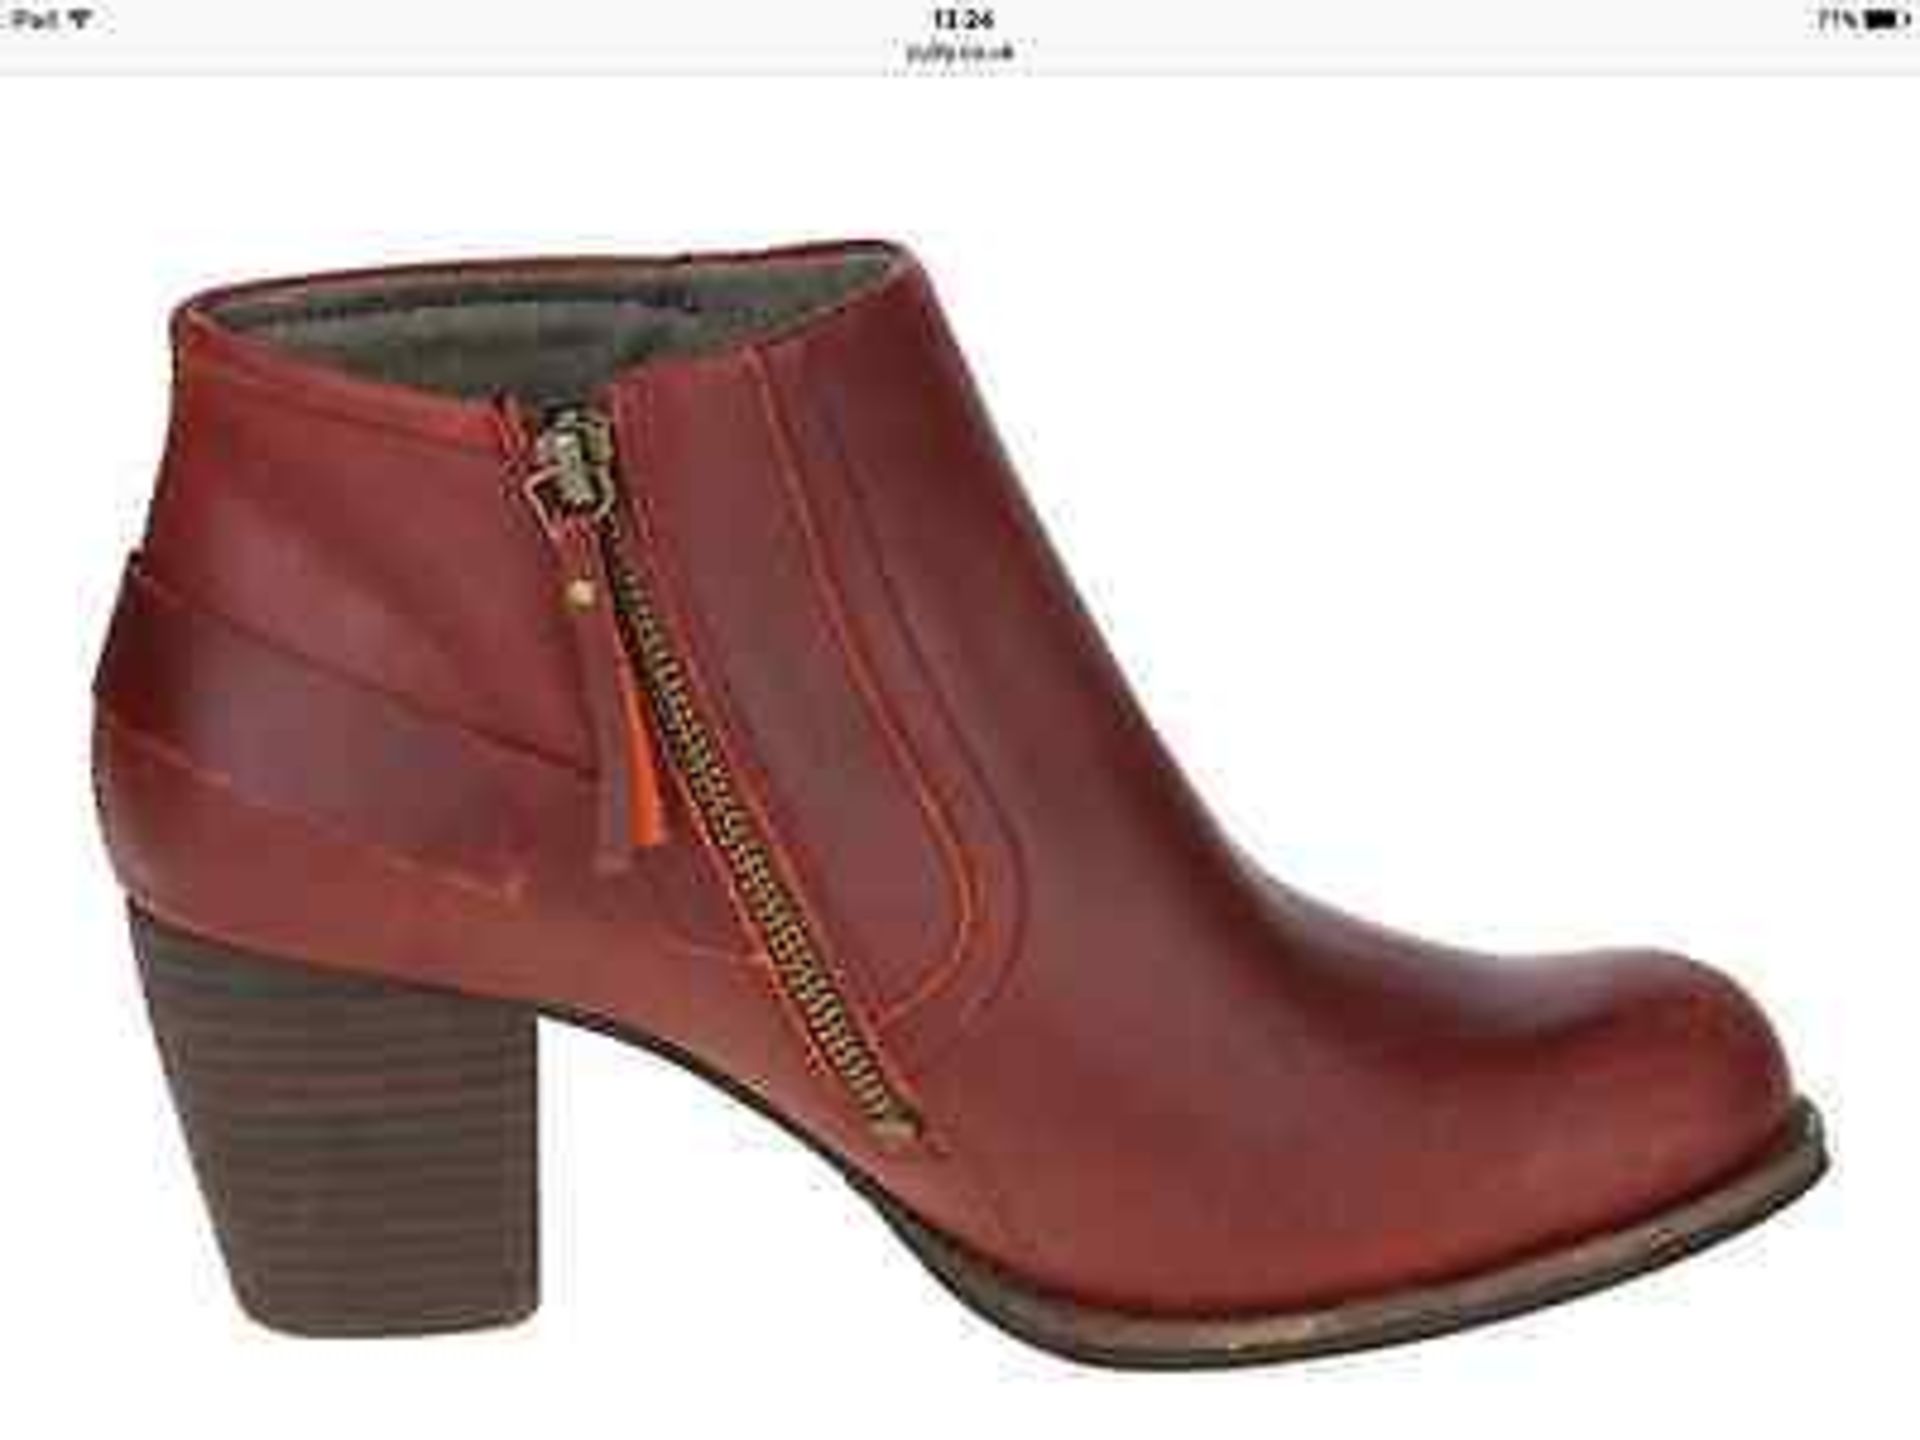 Cat Footwear Firewood Ladies Annette Leather Bootie, size 3.5, RRP £222.99 (New with box) [Ref: ] - Image 5 of 7